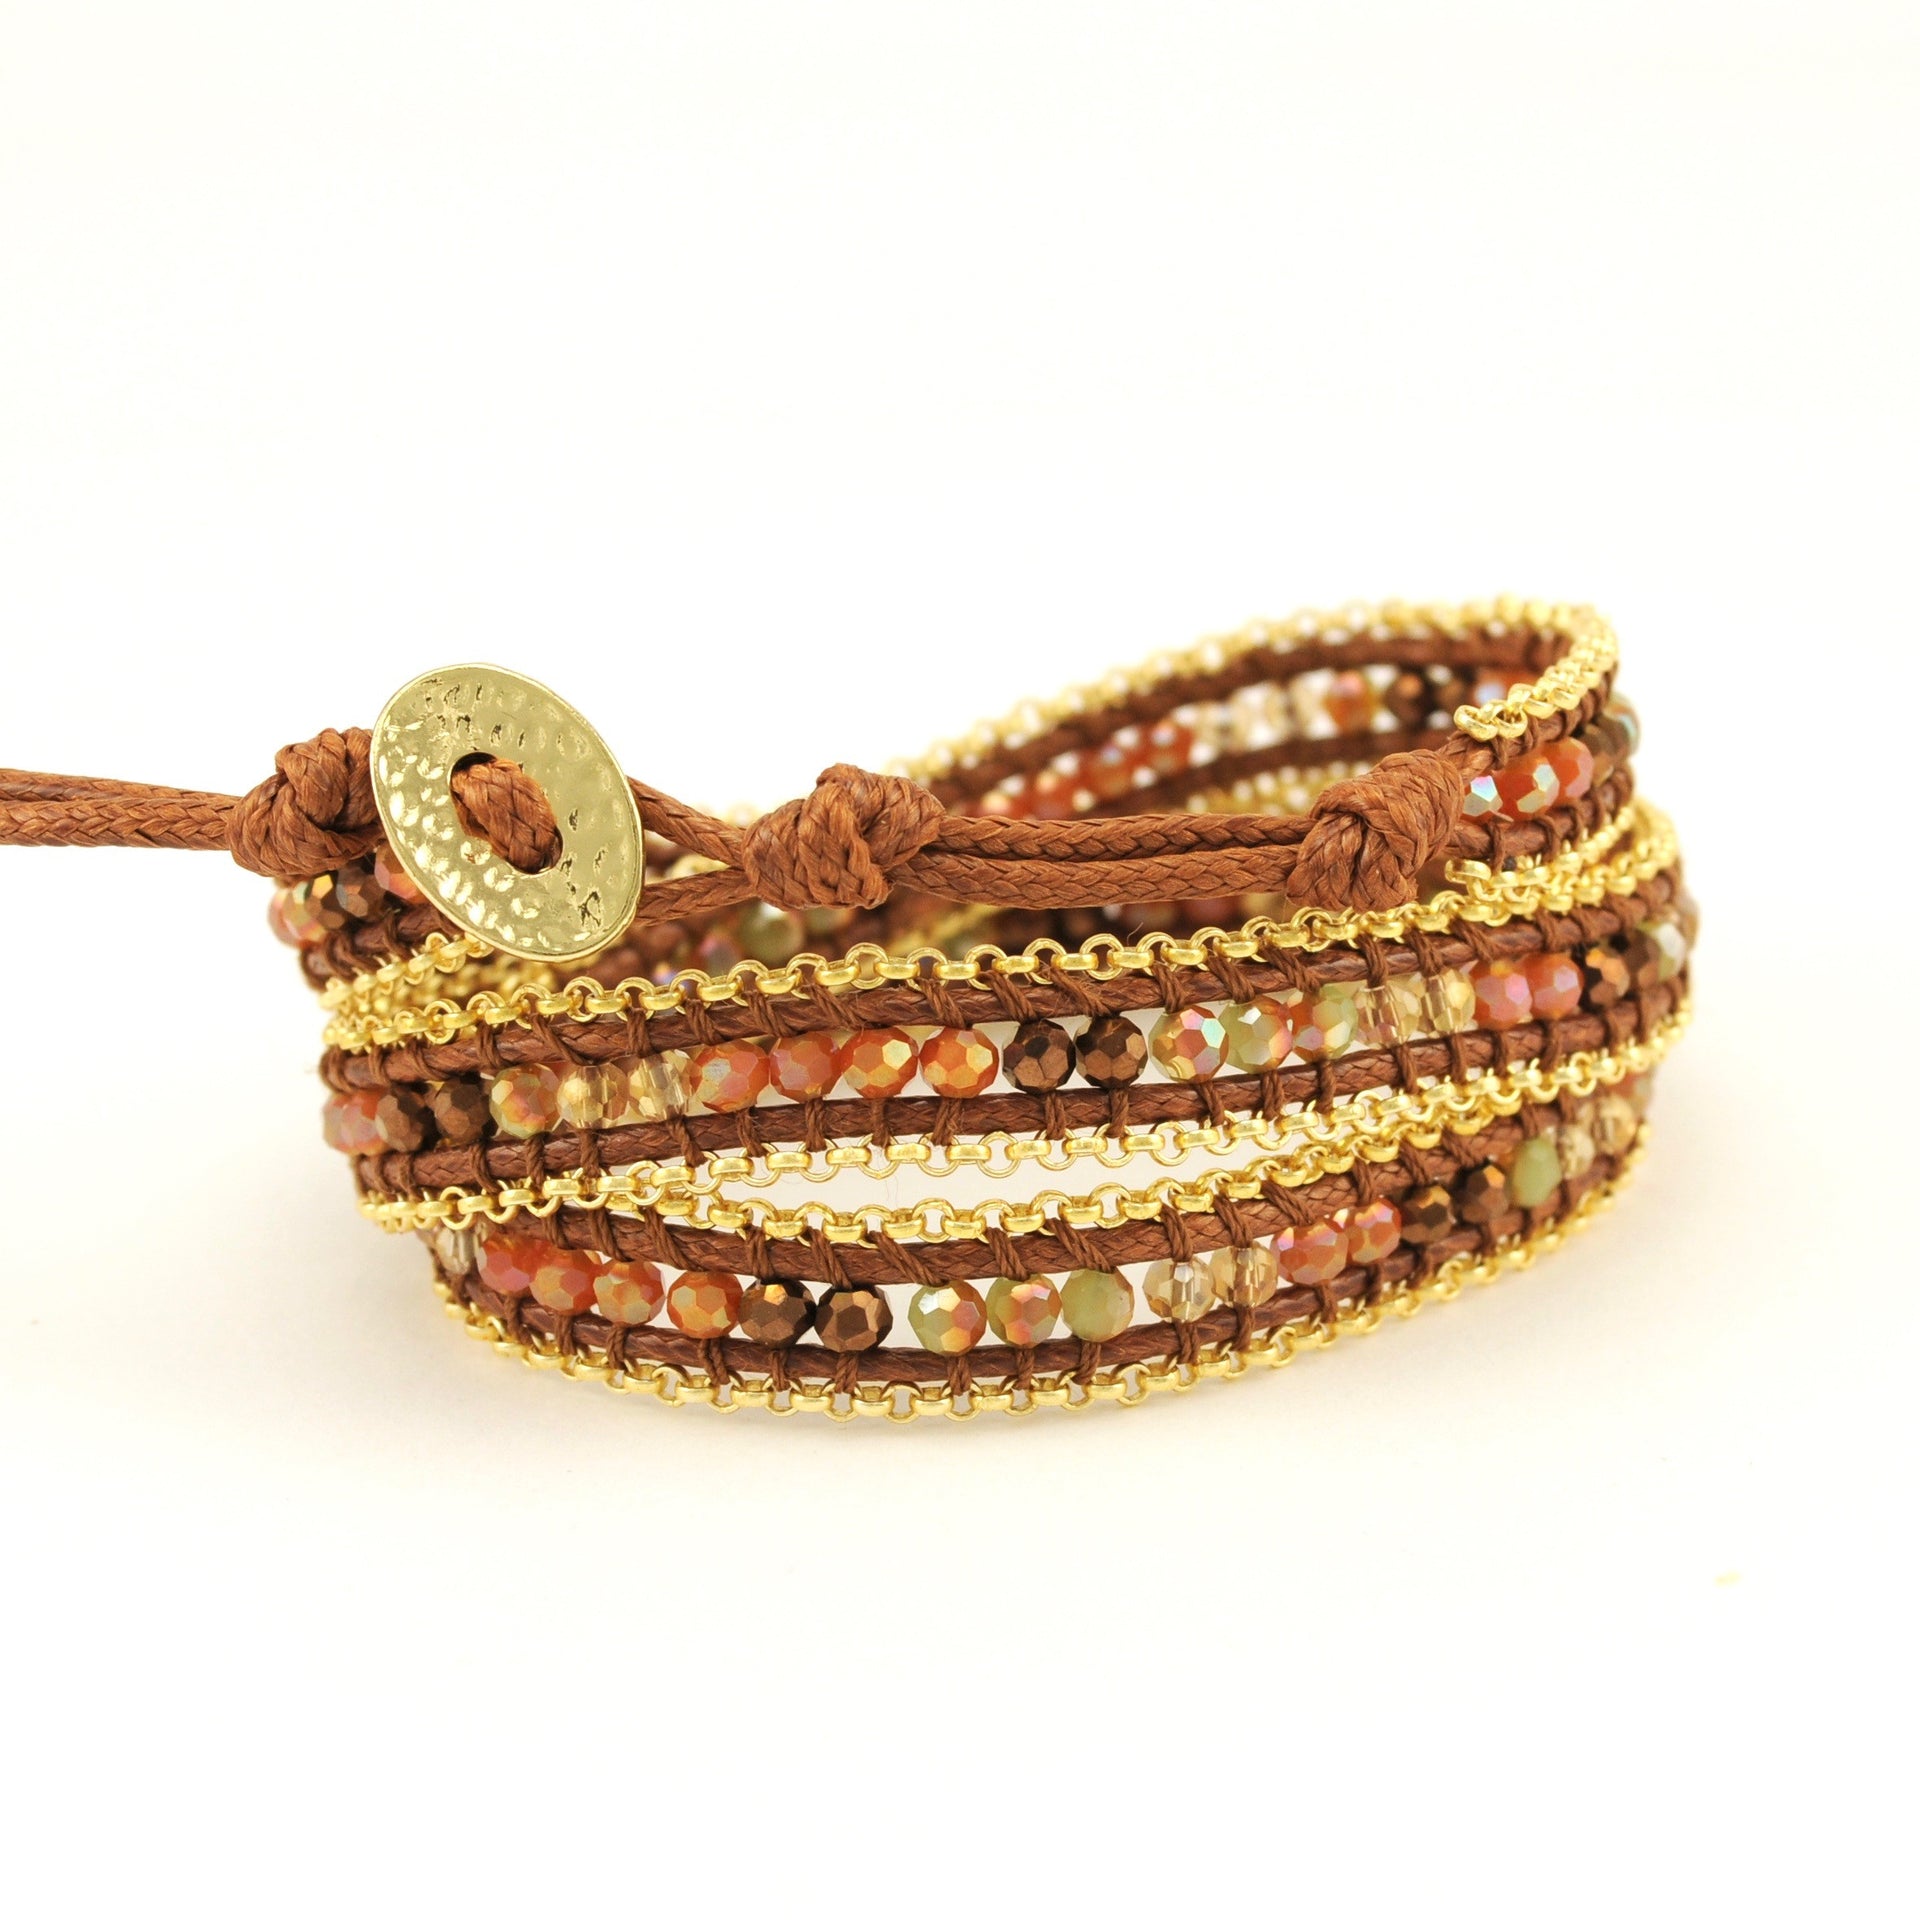 Crystal and Waxed Cotton Wrap Bracelet